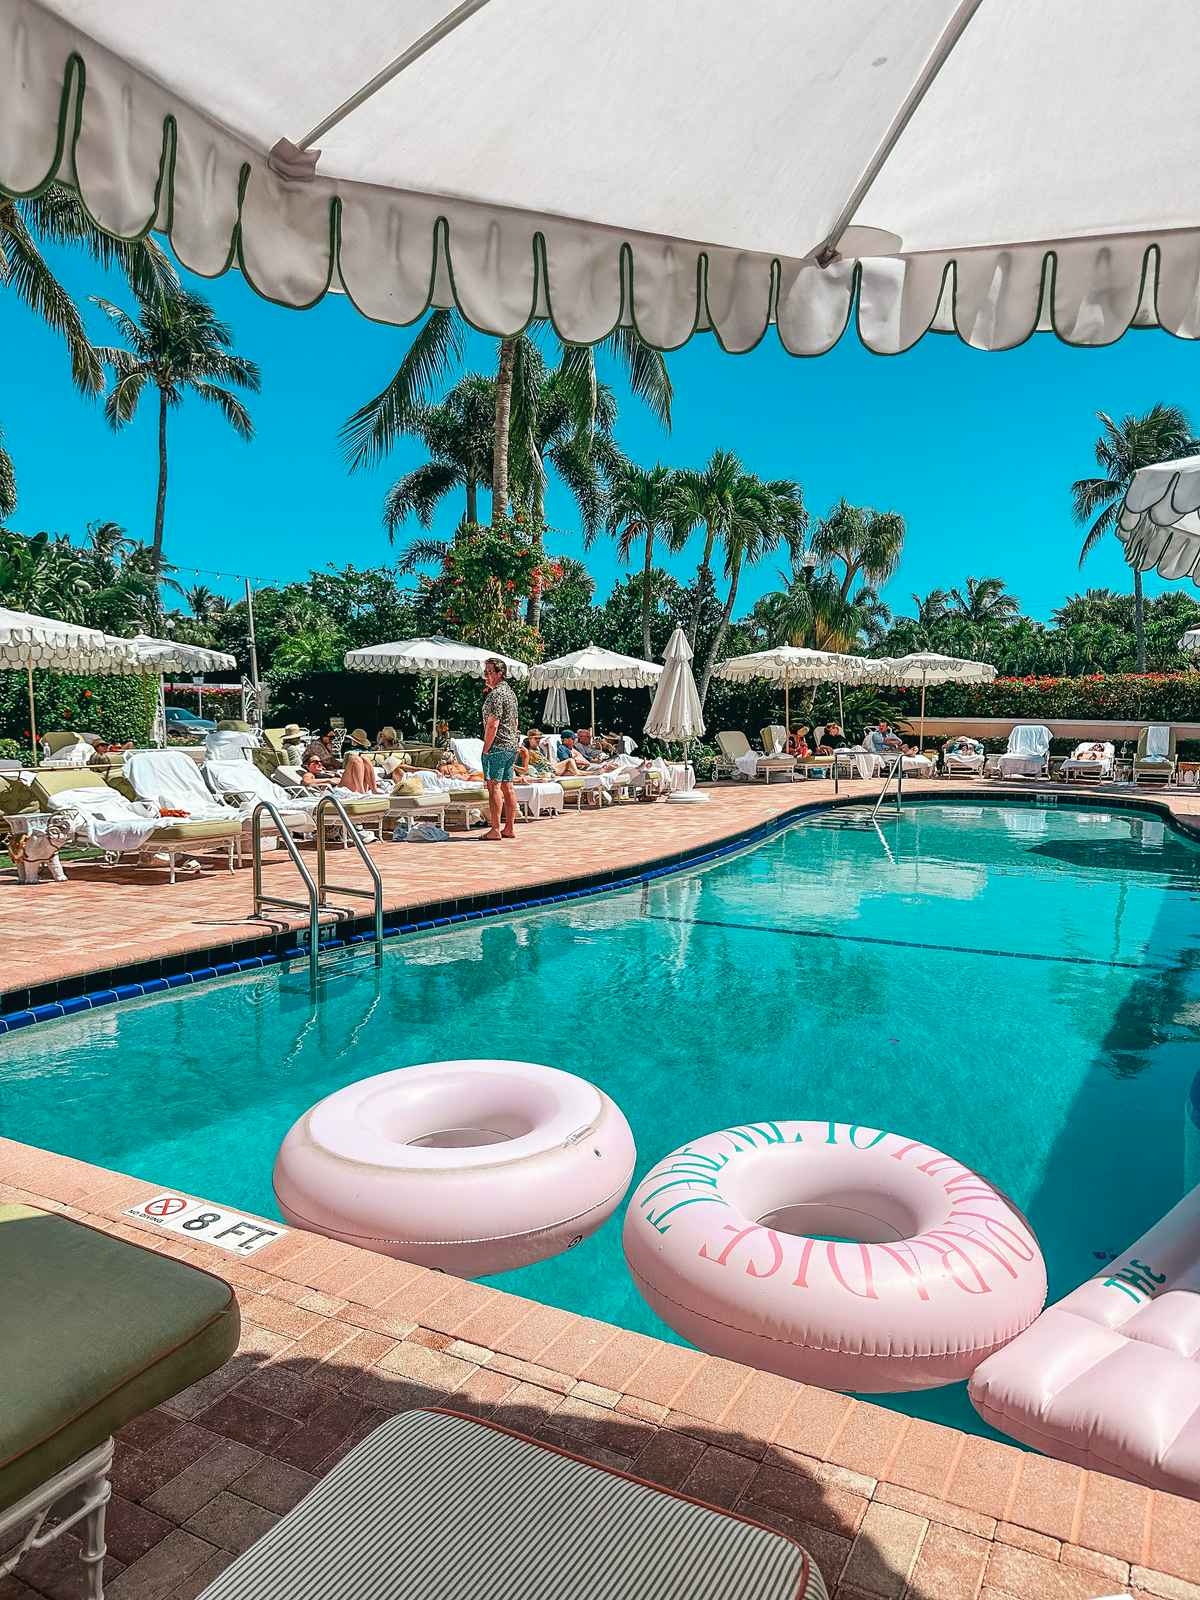 Pool area at The Colony Hotel in Palm Beach